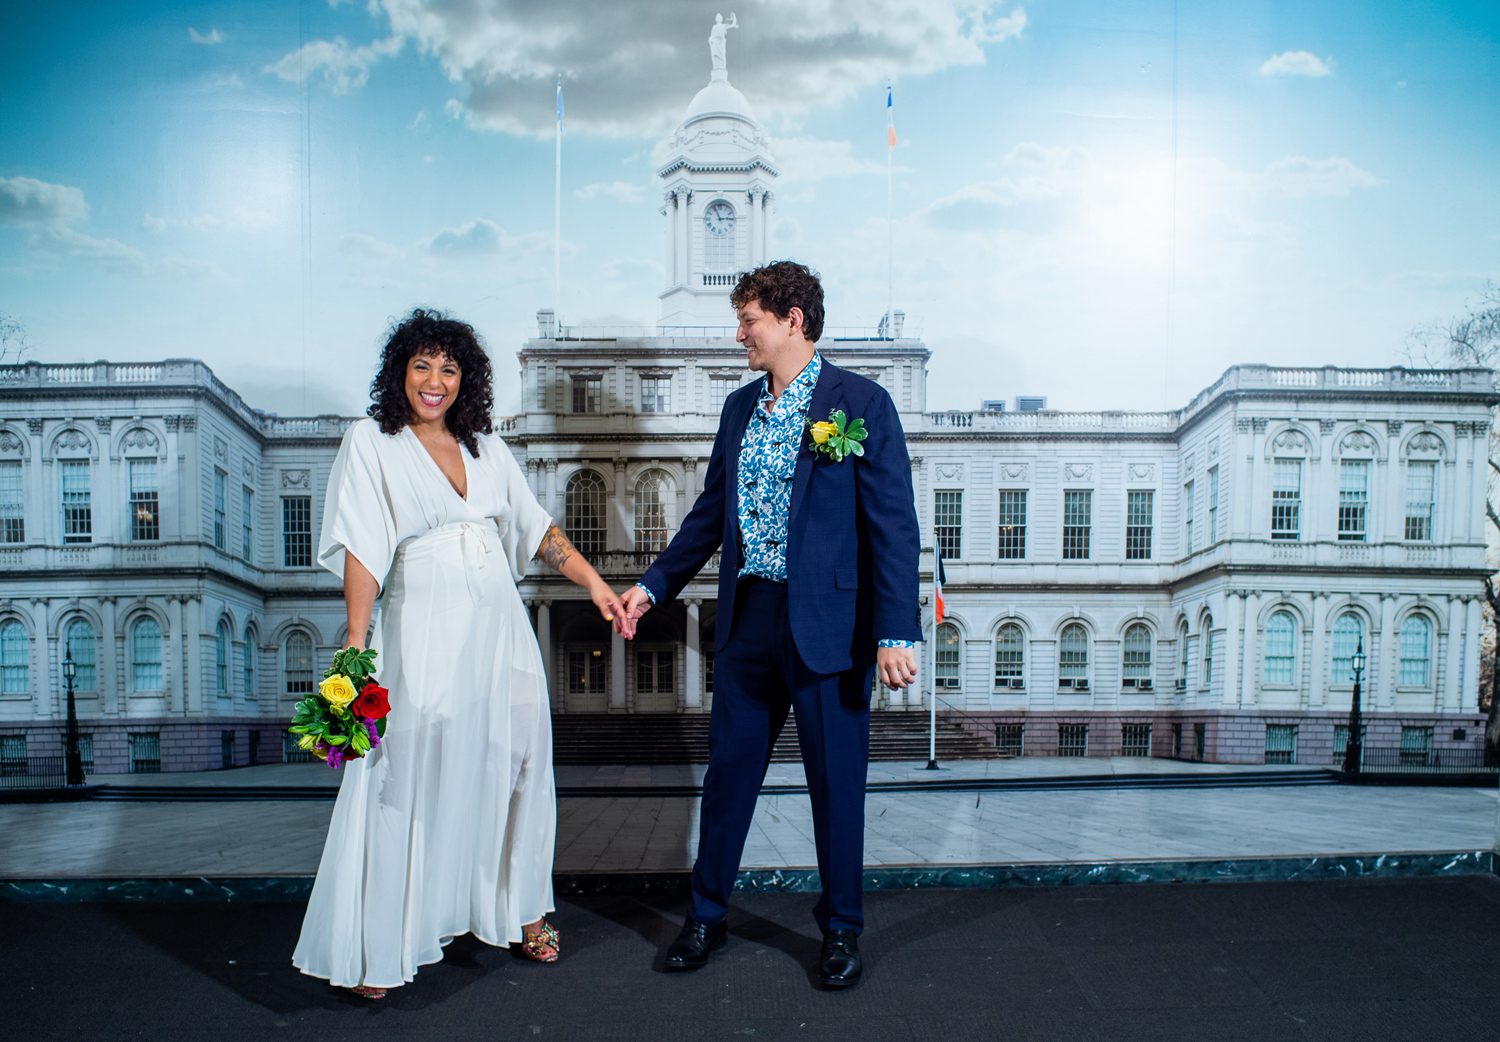 Getting Married at City Hall NYC